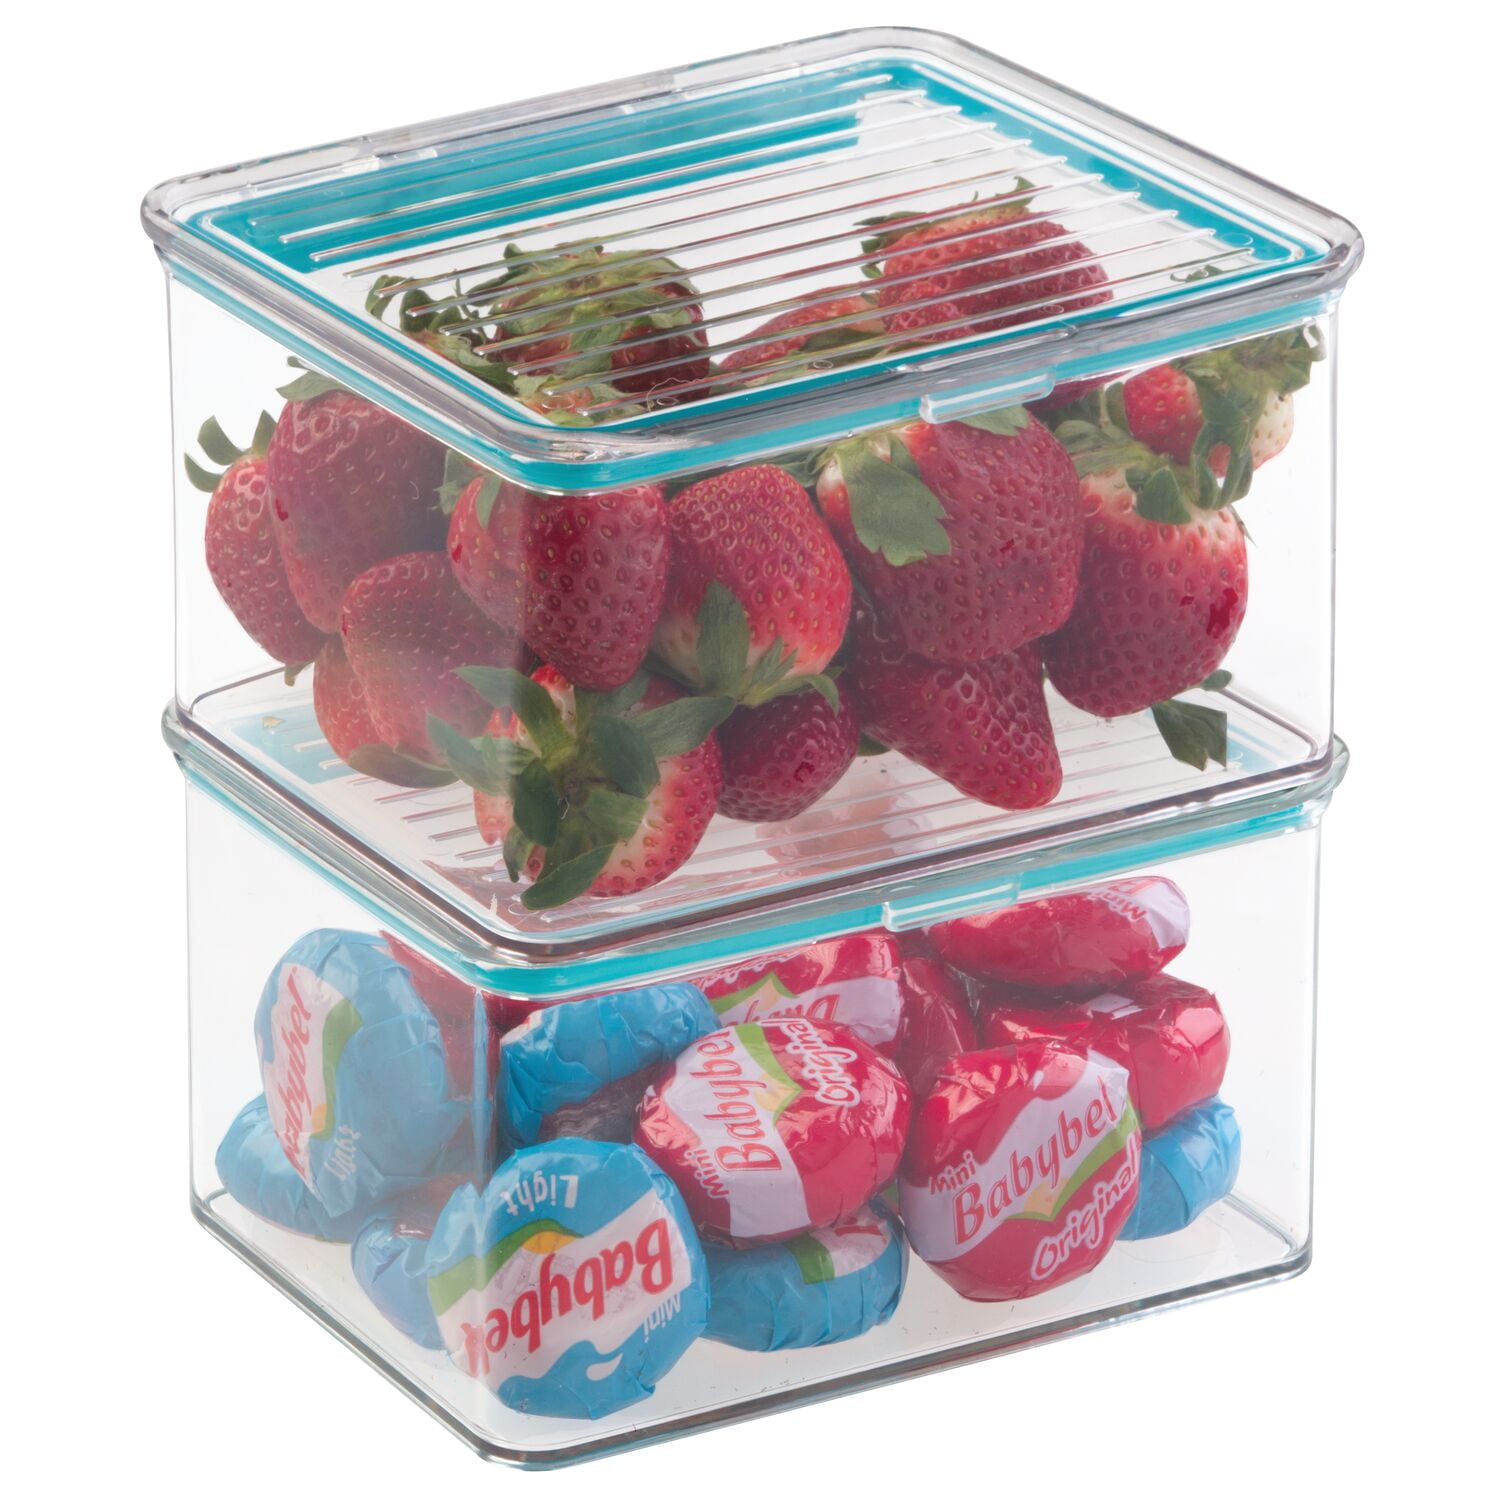 UIYIHIF Food Storage Containers with Lids Airtight 6PCS Reusable Divided  Fridge Organizer Removable Individual Plastic Food Containers for Pantry